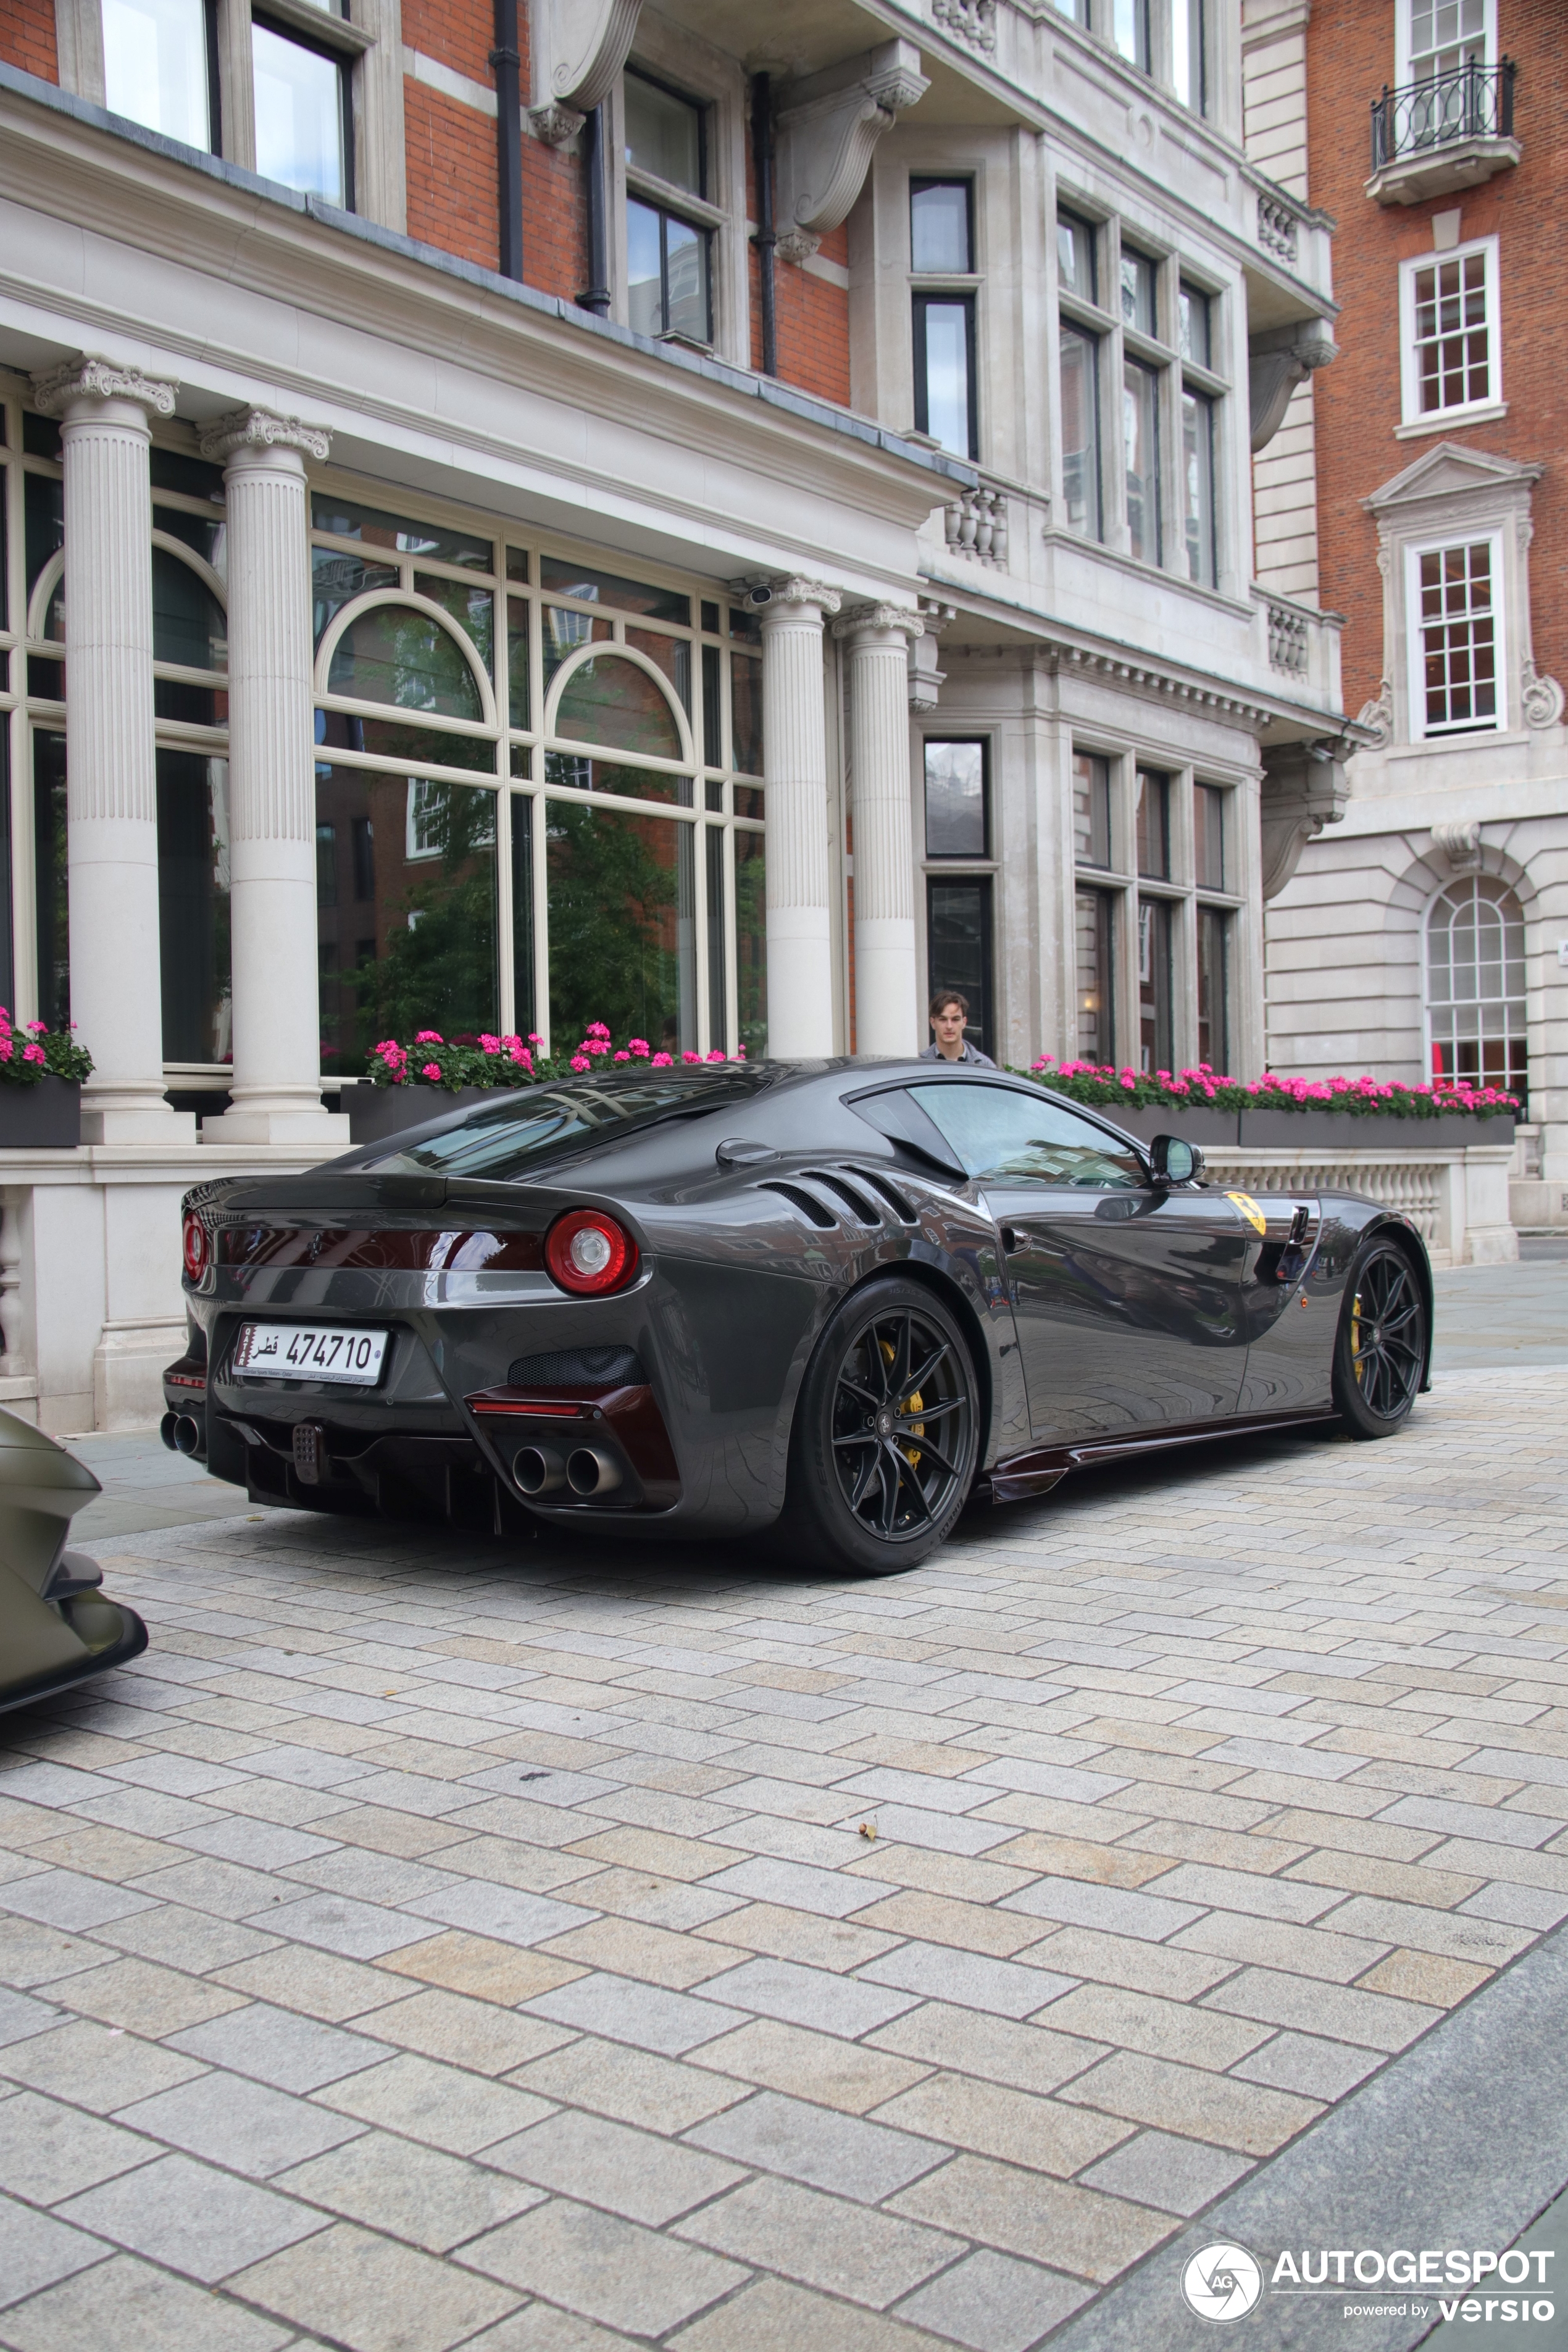 A beautiful and equally special Ferrari F12tdf shows up in London